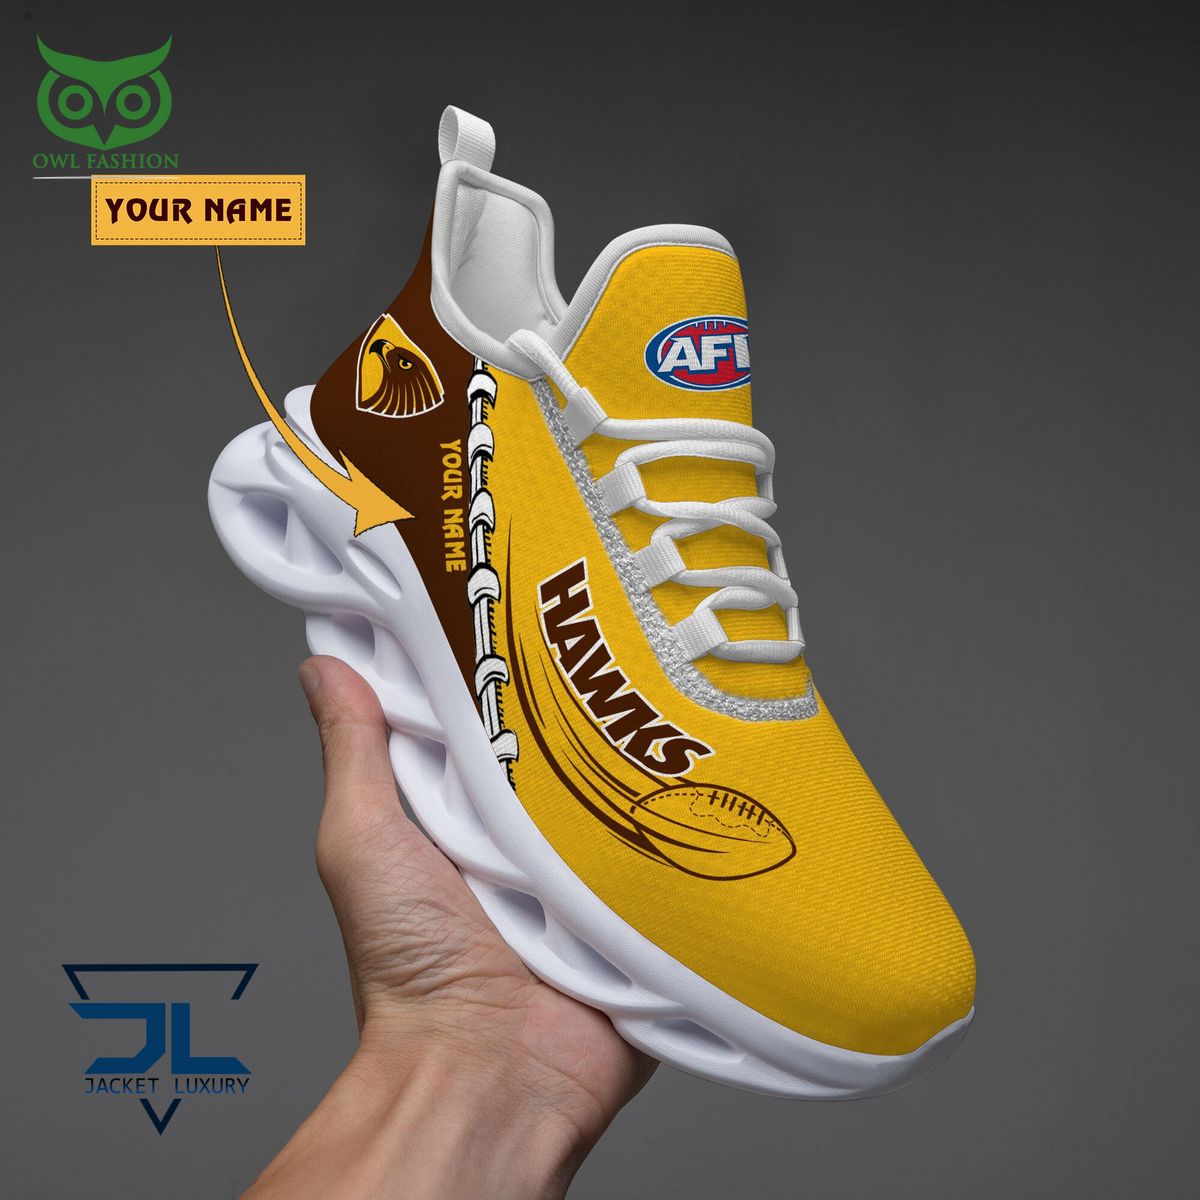 hawthorn football club afl personalized max soul shoes 1 RUOXd